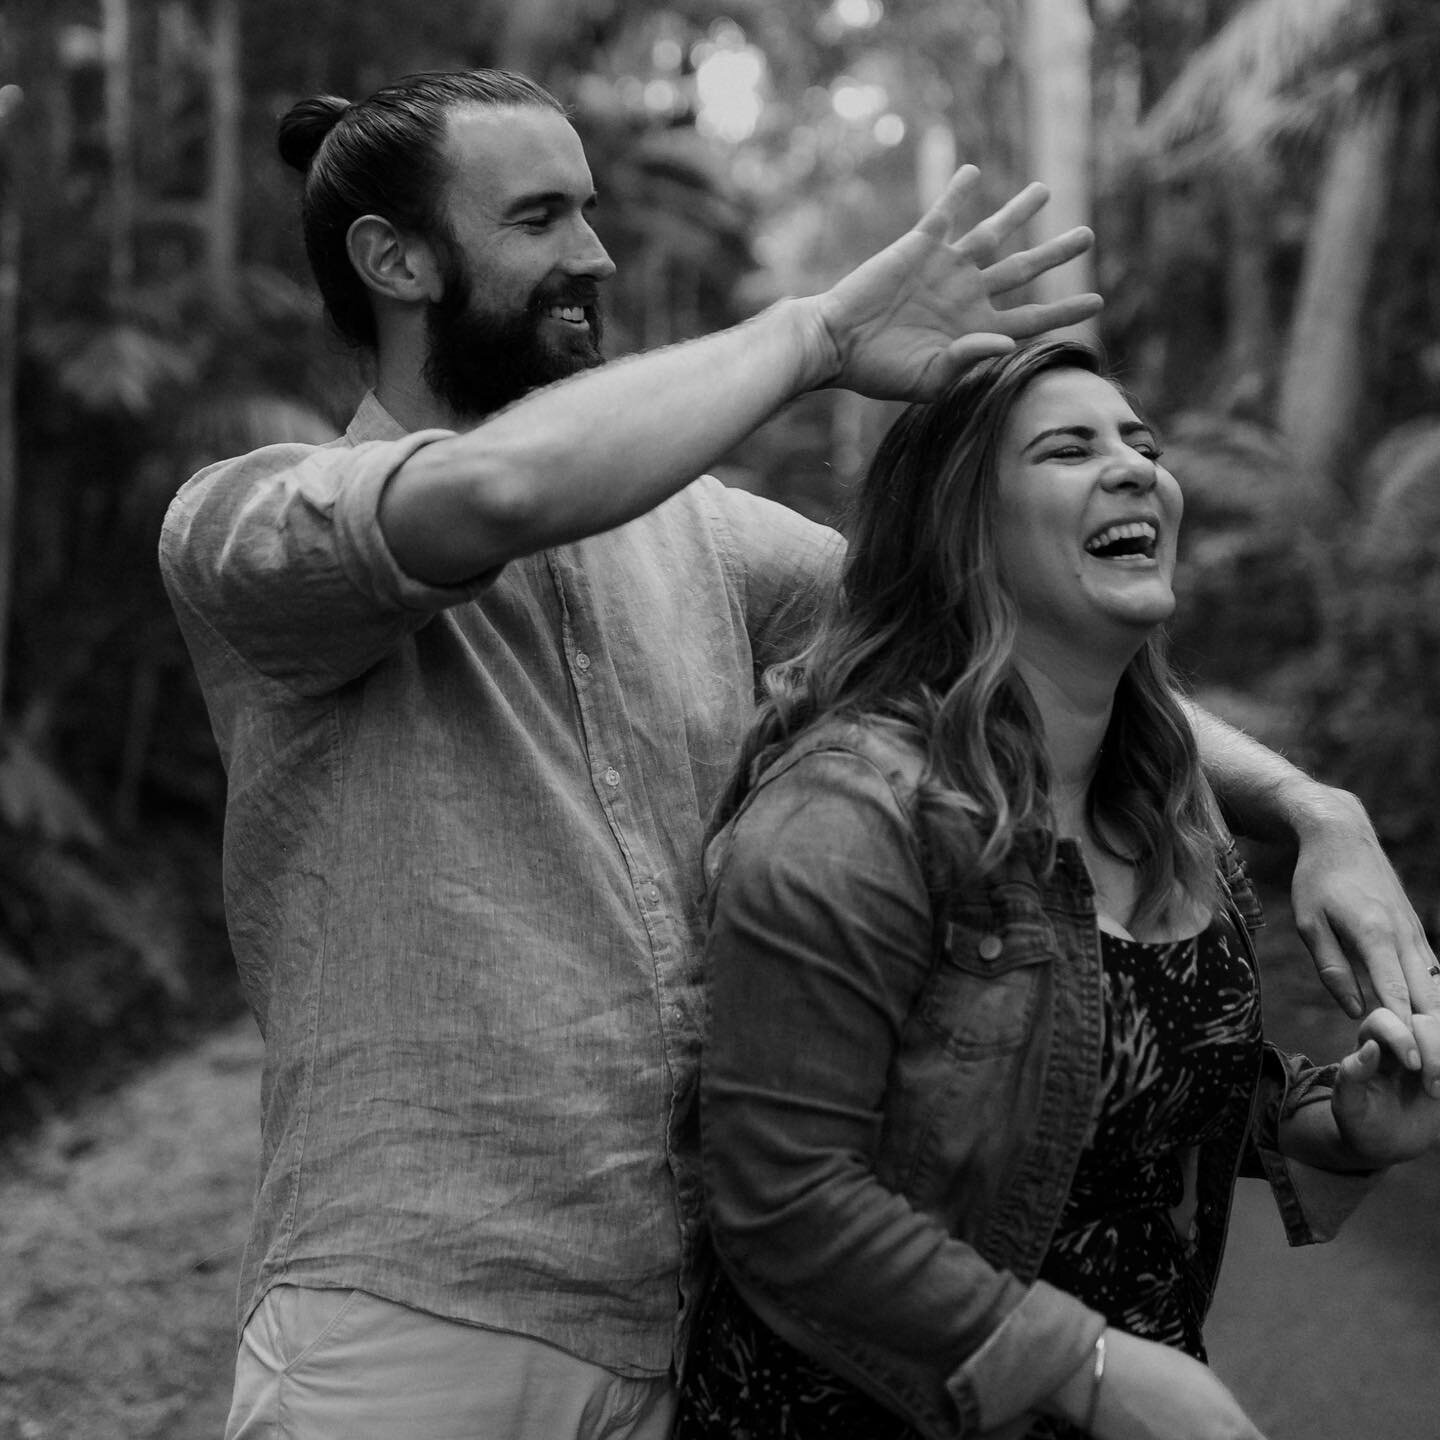 &bull; Katelyn + Dave 

Swipe throwing some of my favourite B+W shots from this engagement shoot. 
Also giving out the award for most time spent laughing at terrible dad jokes during a shoot to Katelyn and Dave 😂